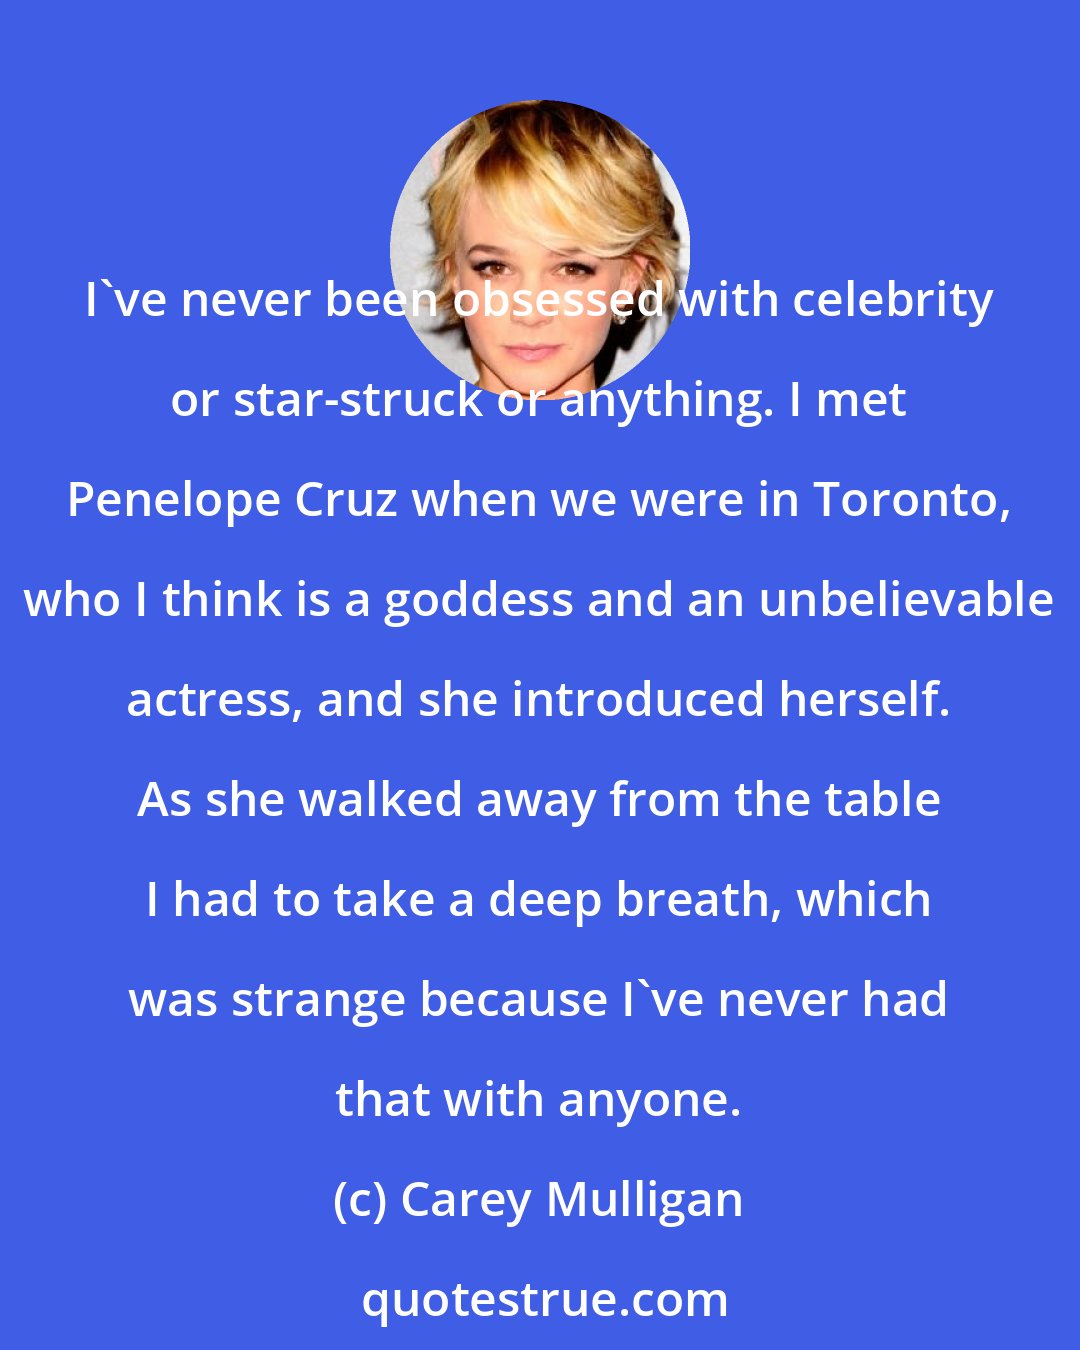 Carey Mulligan: I've never been obsessed with celebrity or star-struck or anything. I met Penelope Cruz when we were in Toronto, who I think is a goddess and an unbelievable actress, and she introduced herself. As she walked away from the table I had to take a deep breath, which was strange because I've never had that with anyone.